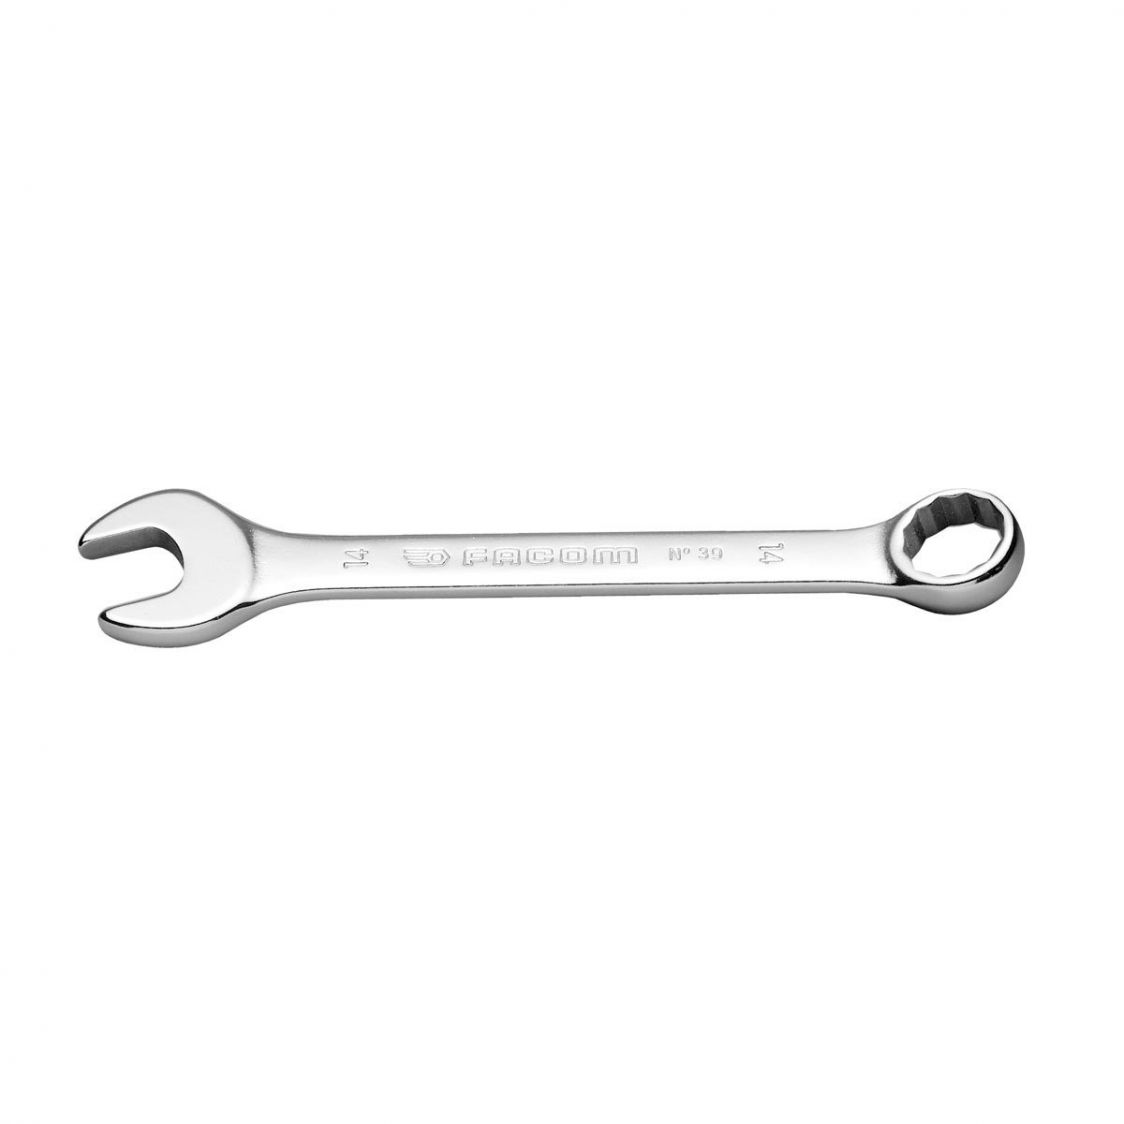 FACOM 39.10 - 10mm Metric Stubby Combination Spanner